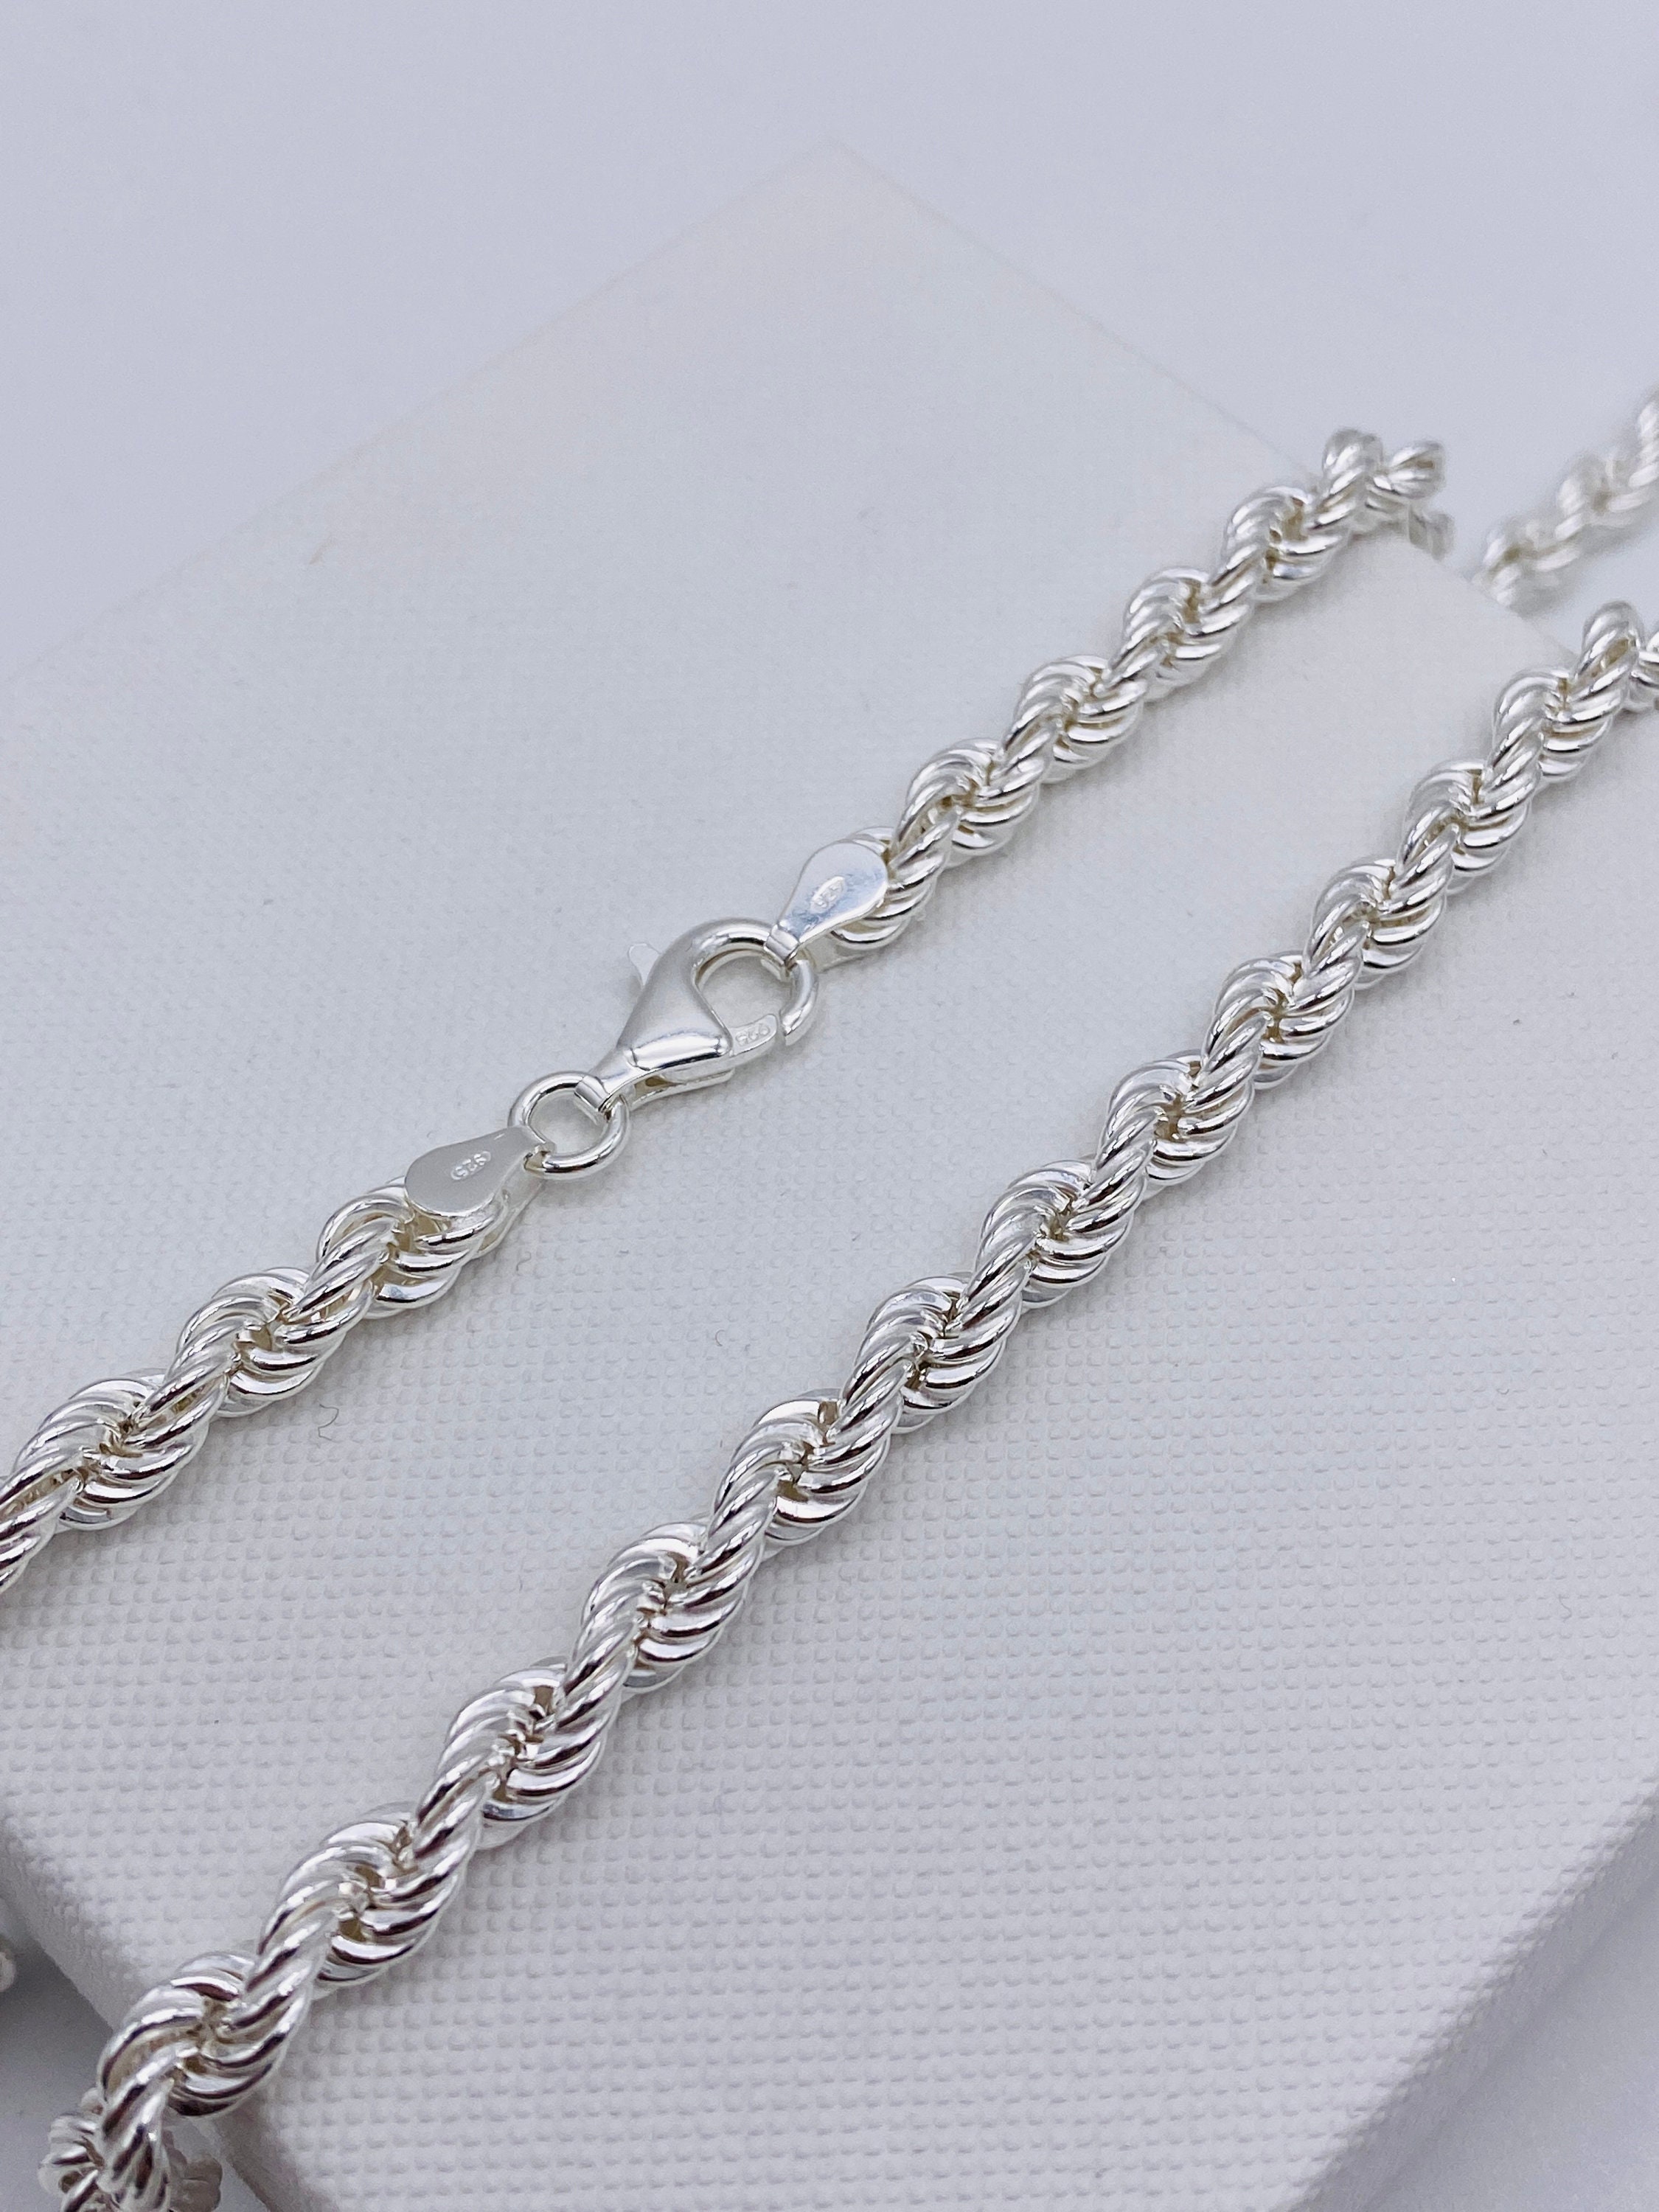 Heavy Rope Necklace 925 Sterling Silver, Rope Chain for Women and Men,  Sterling Silver Twisted Necklace, Jewelry Gift for Christmas 